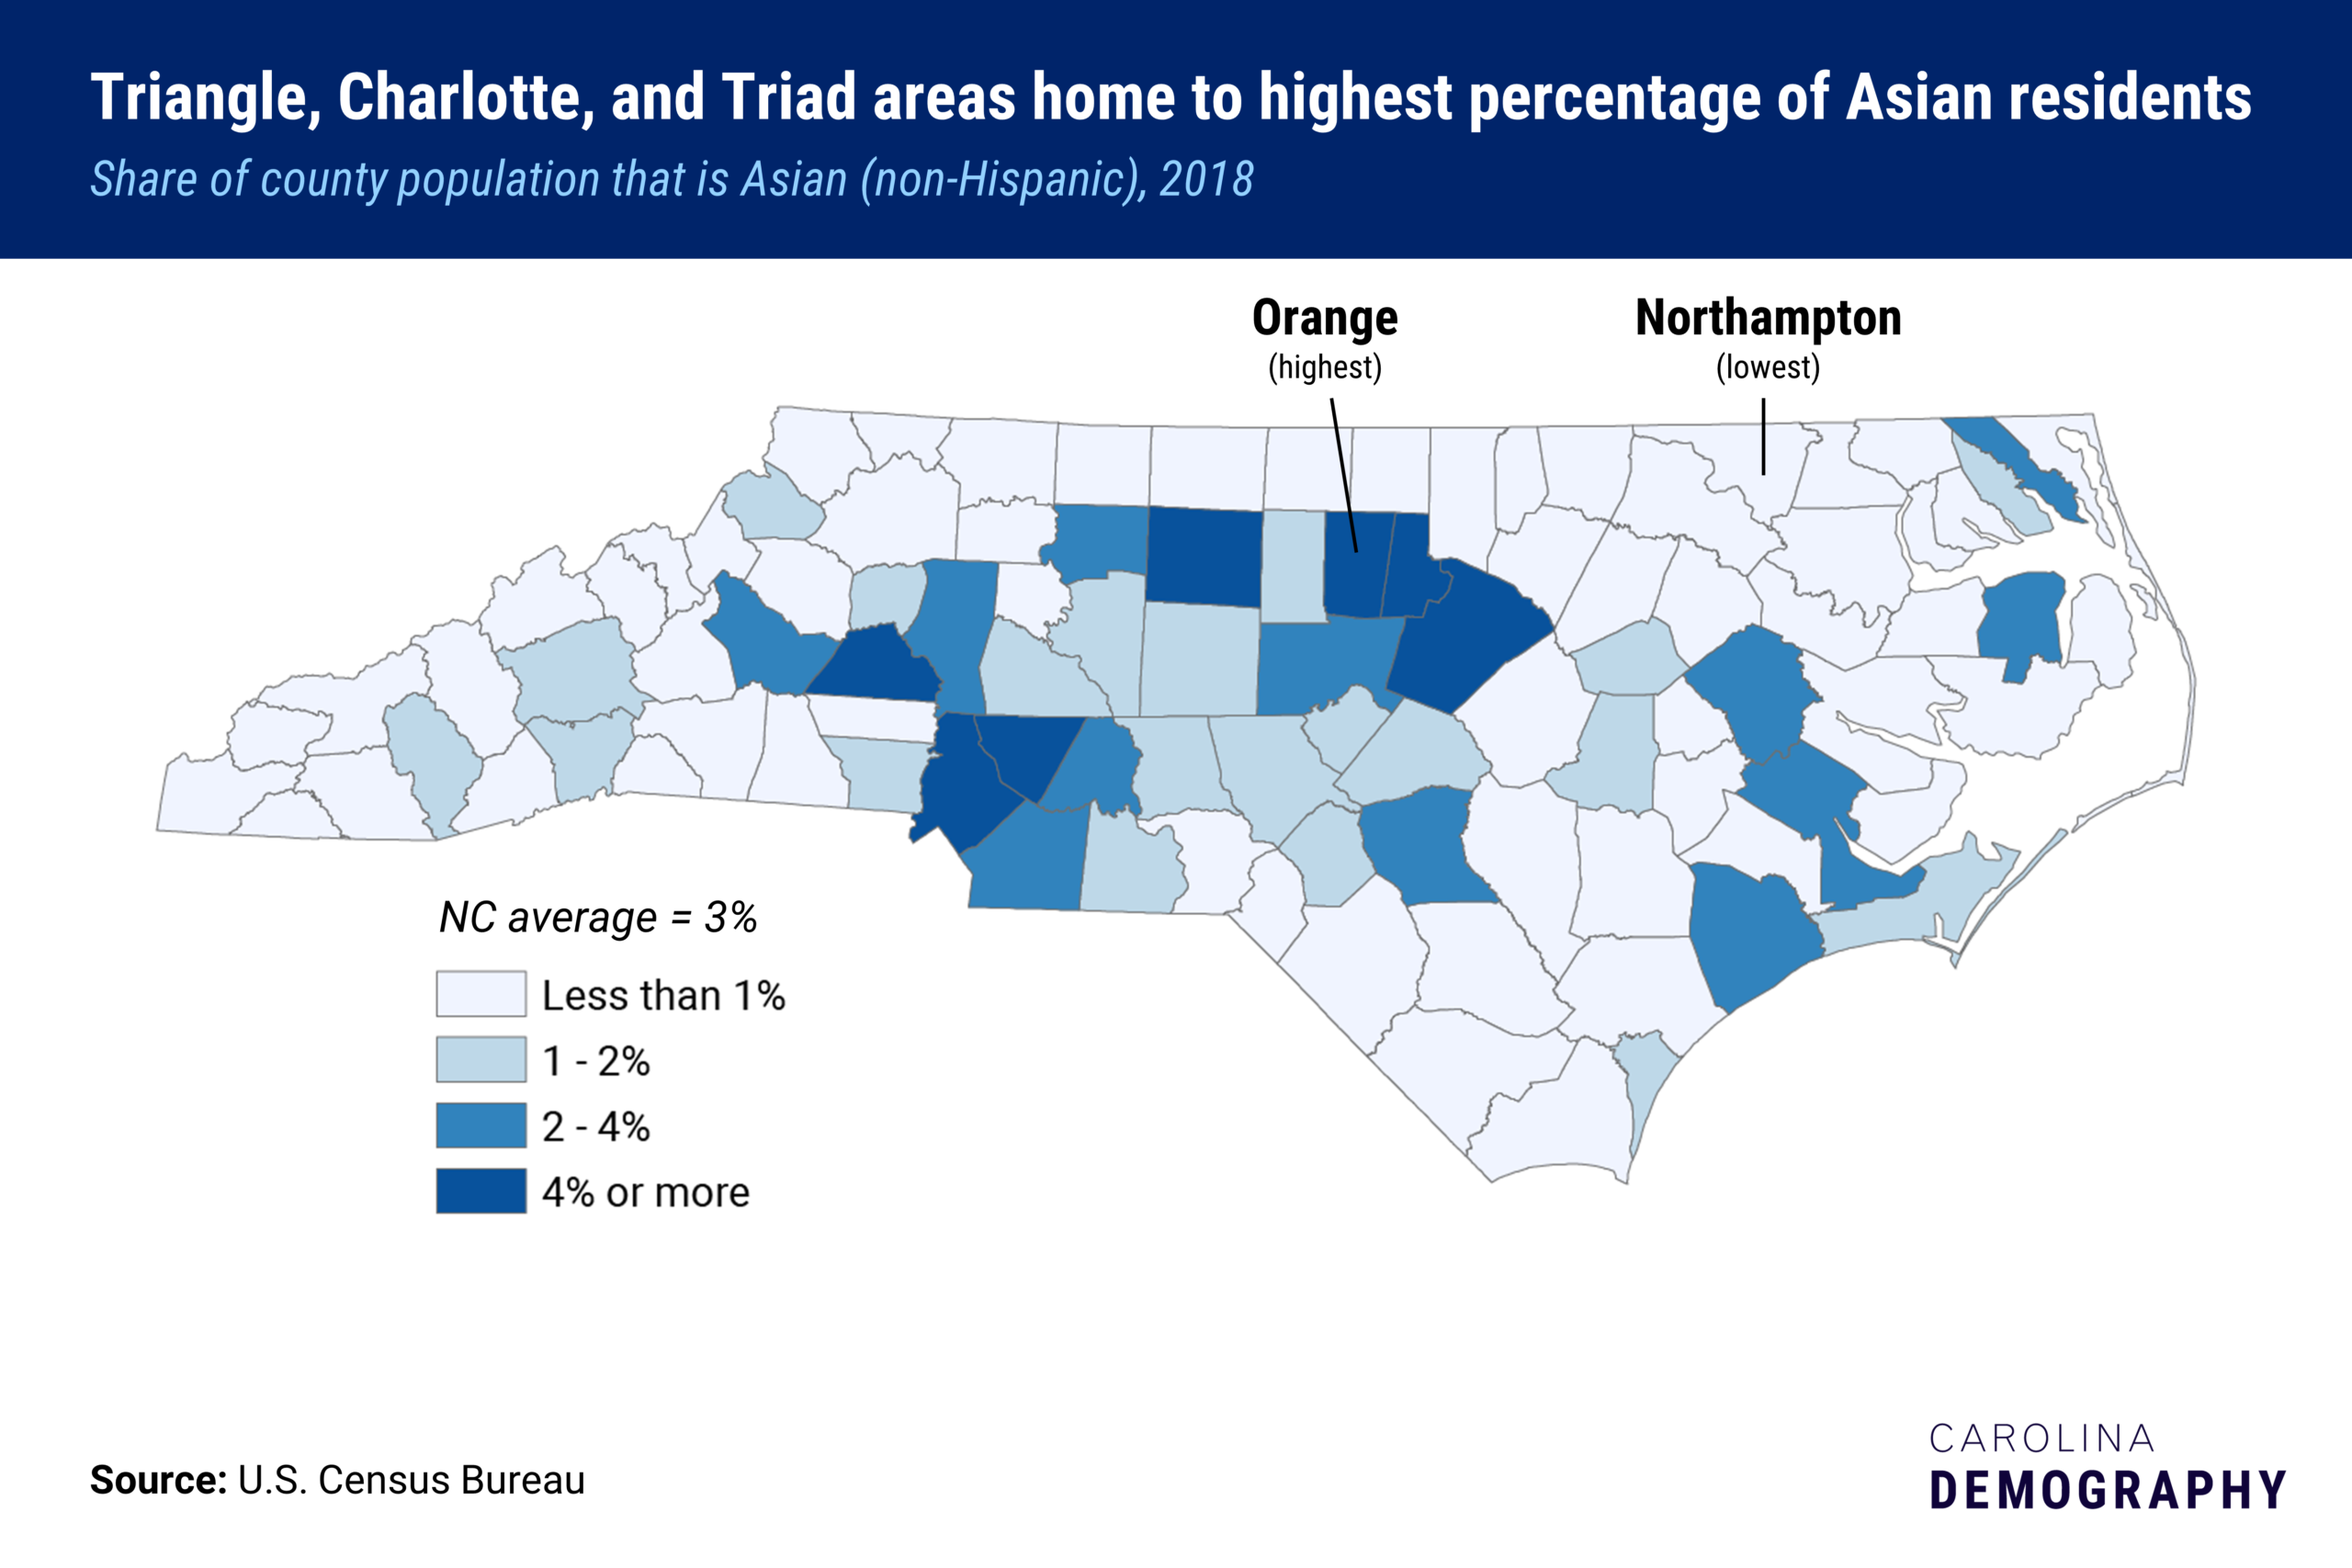 A county map of North Carolina showing the share of county population that is Asian. Orange county has the highest share, where Newhampton county has the lowest. The state average is 3 percent.